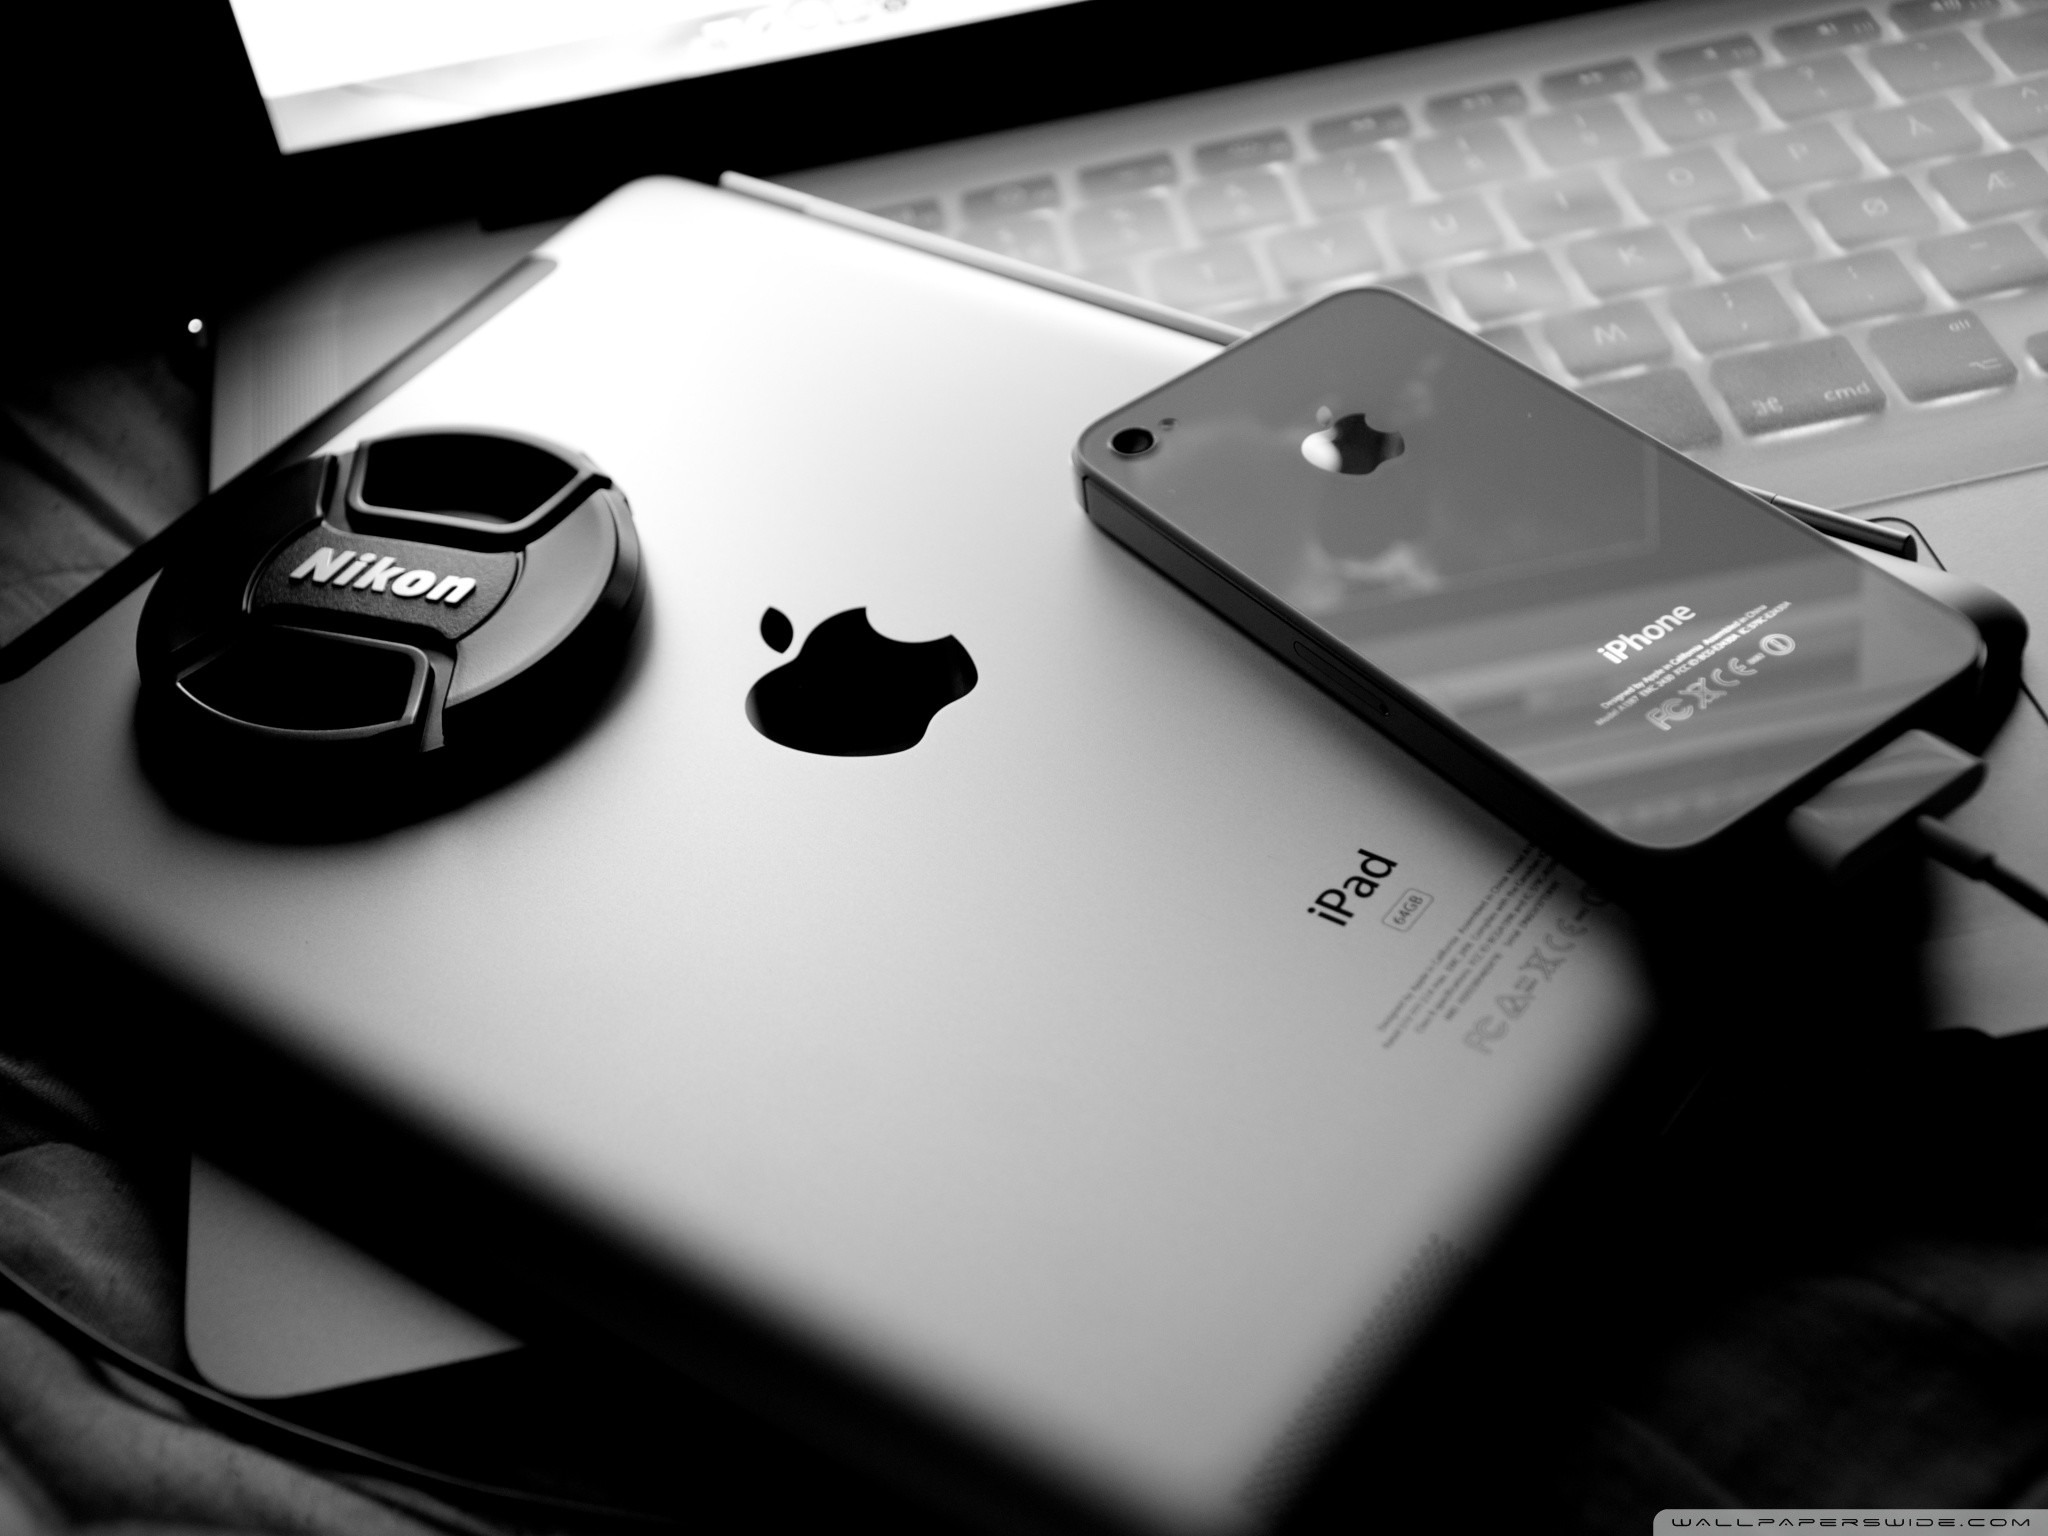 hd ipad wallpapers 2048x1536,white,black,gadget,electronic device,black and white